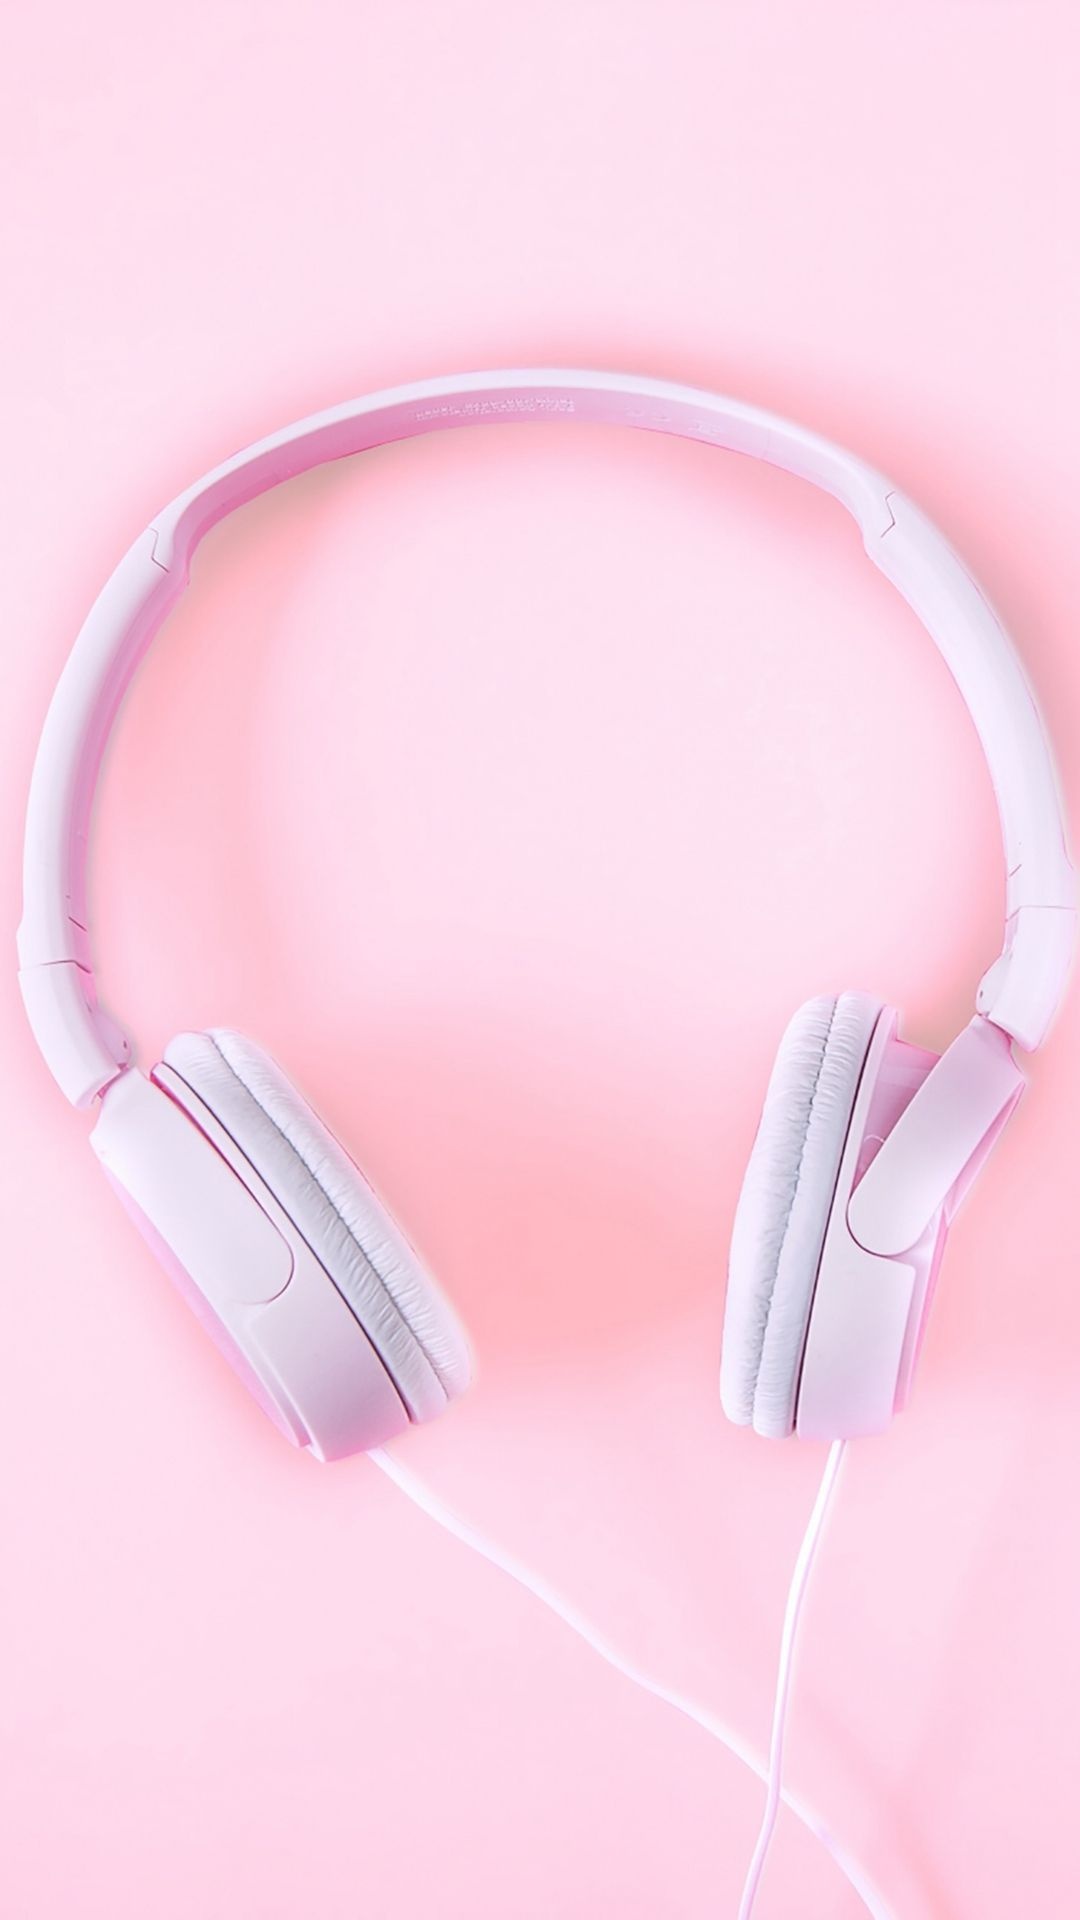 Pure fashion pink headphones, Stylish and trendy, iPhone 8 wallpapers, Fashion-forward accessory, 1080x1920 Full HD Phone